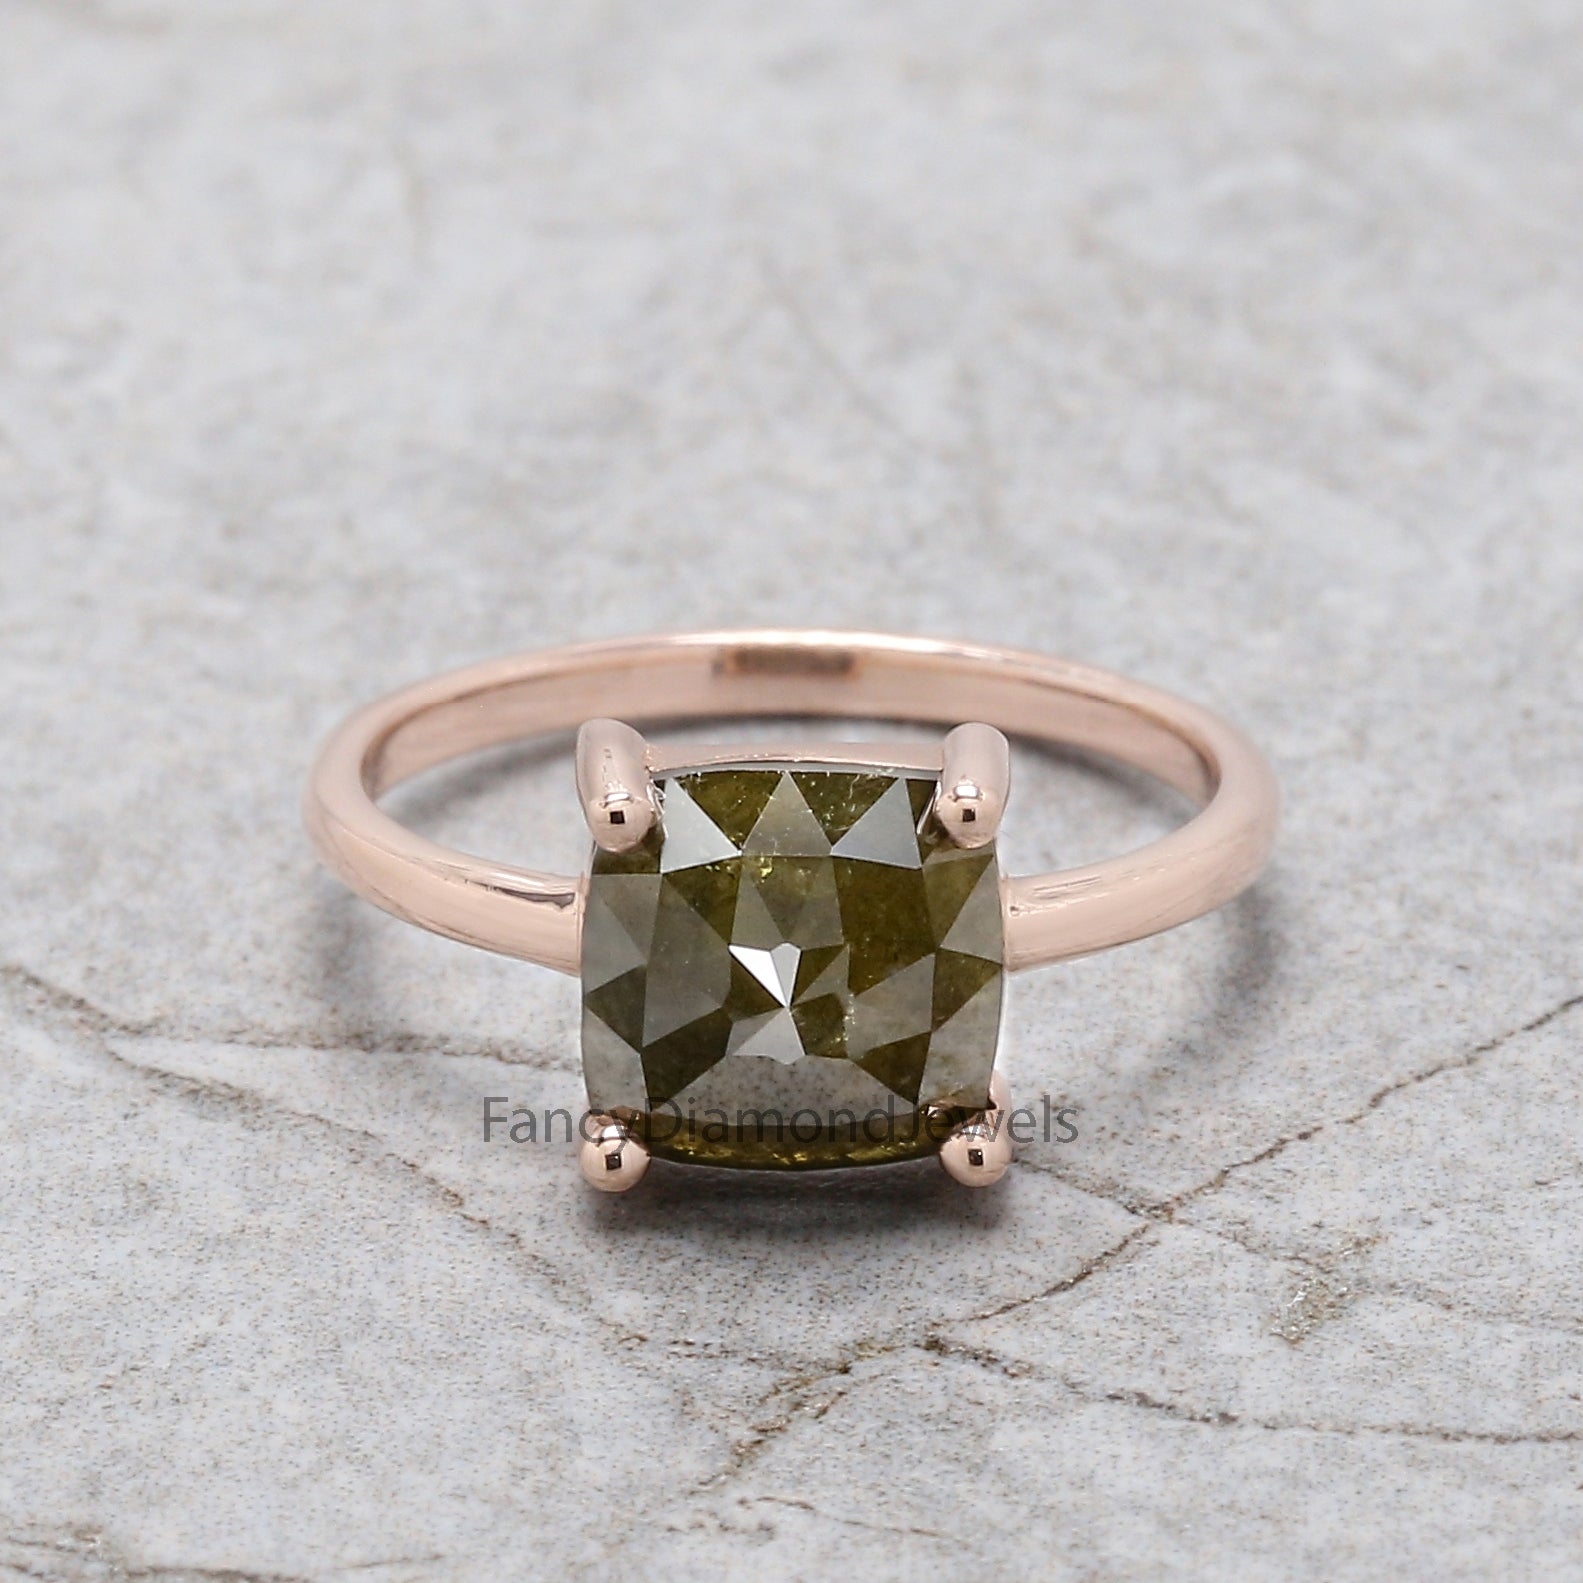 Square Cut Green Color Diamond Ring 2.60 Ct 8.05 MM Square Shape Diamond Ring 14K Solid Rose Gold Silver Engagement Ring Gift For Her QL2464